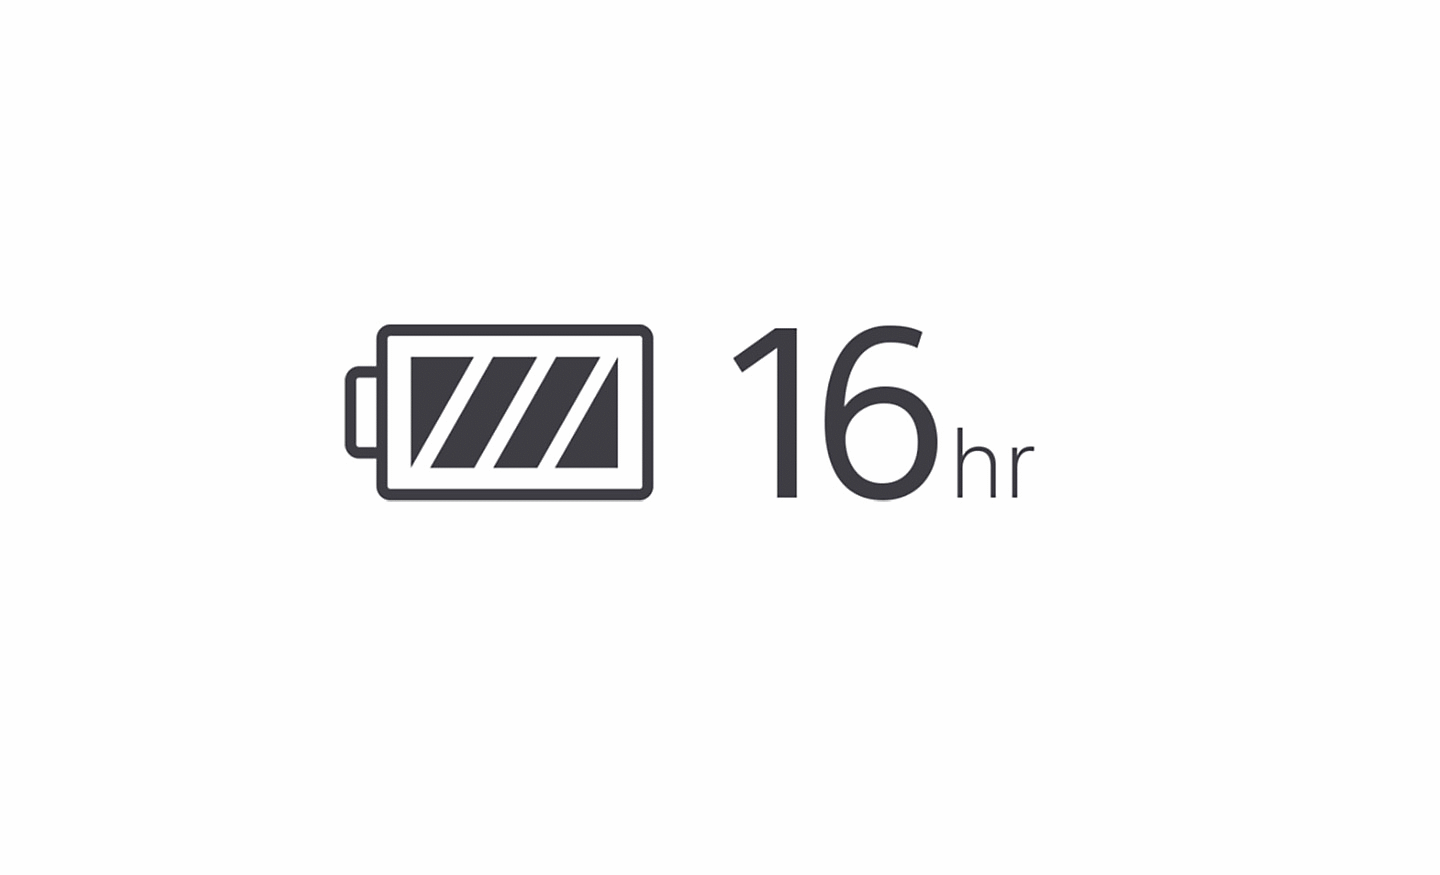 Image of a full battery icon with the text 16hr next to it